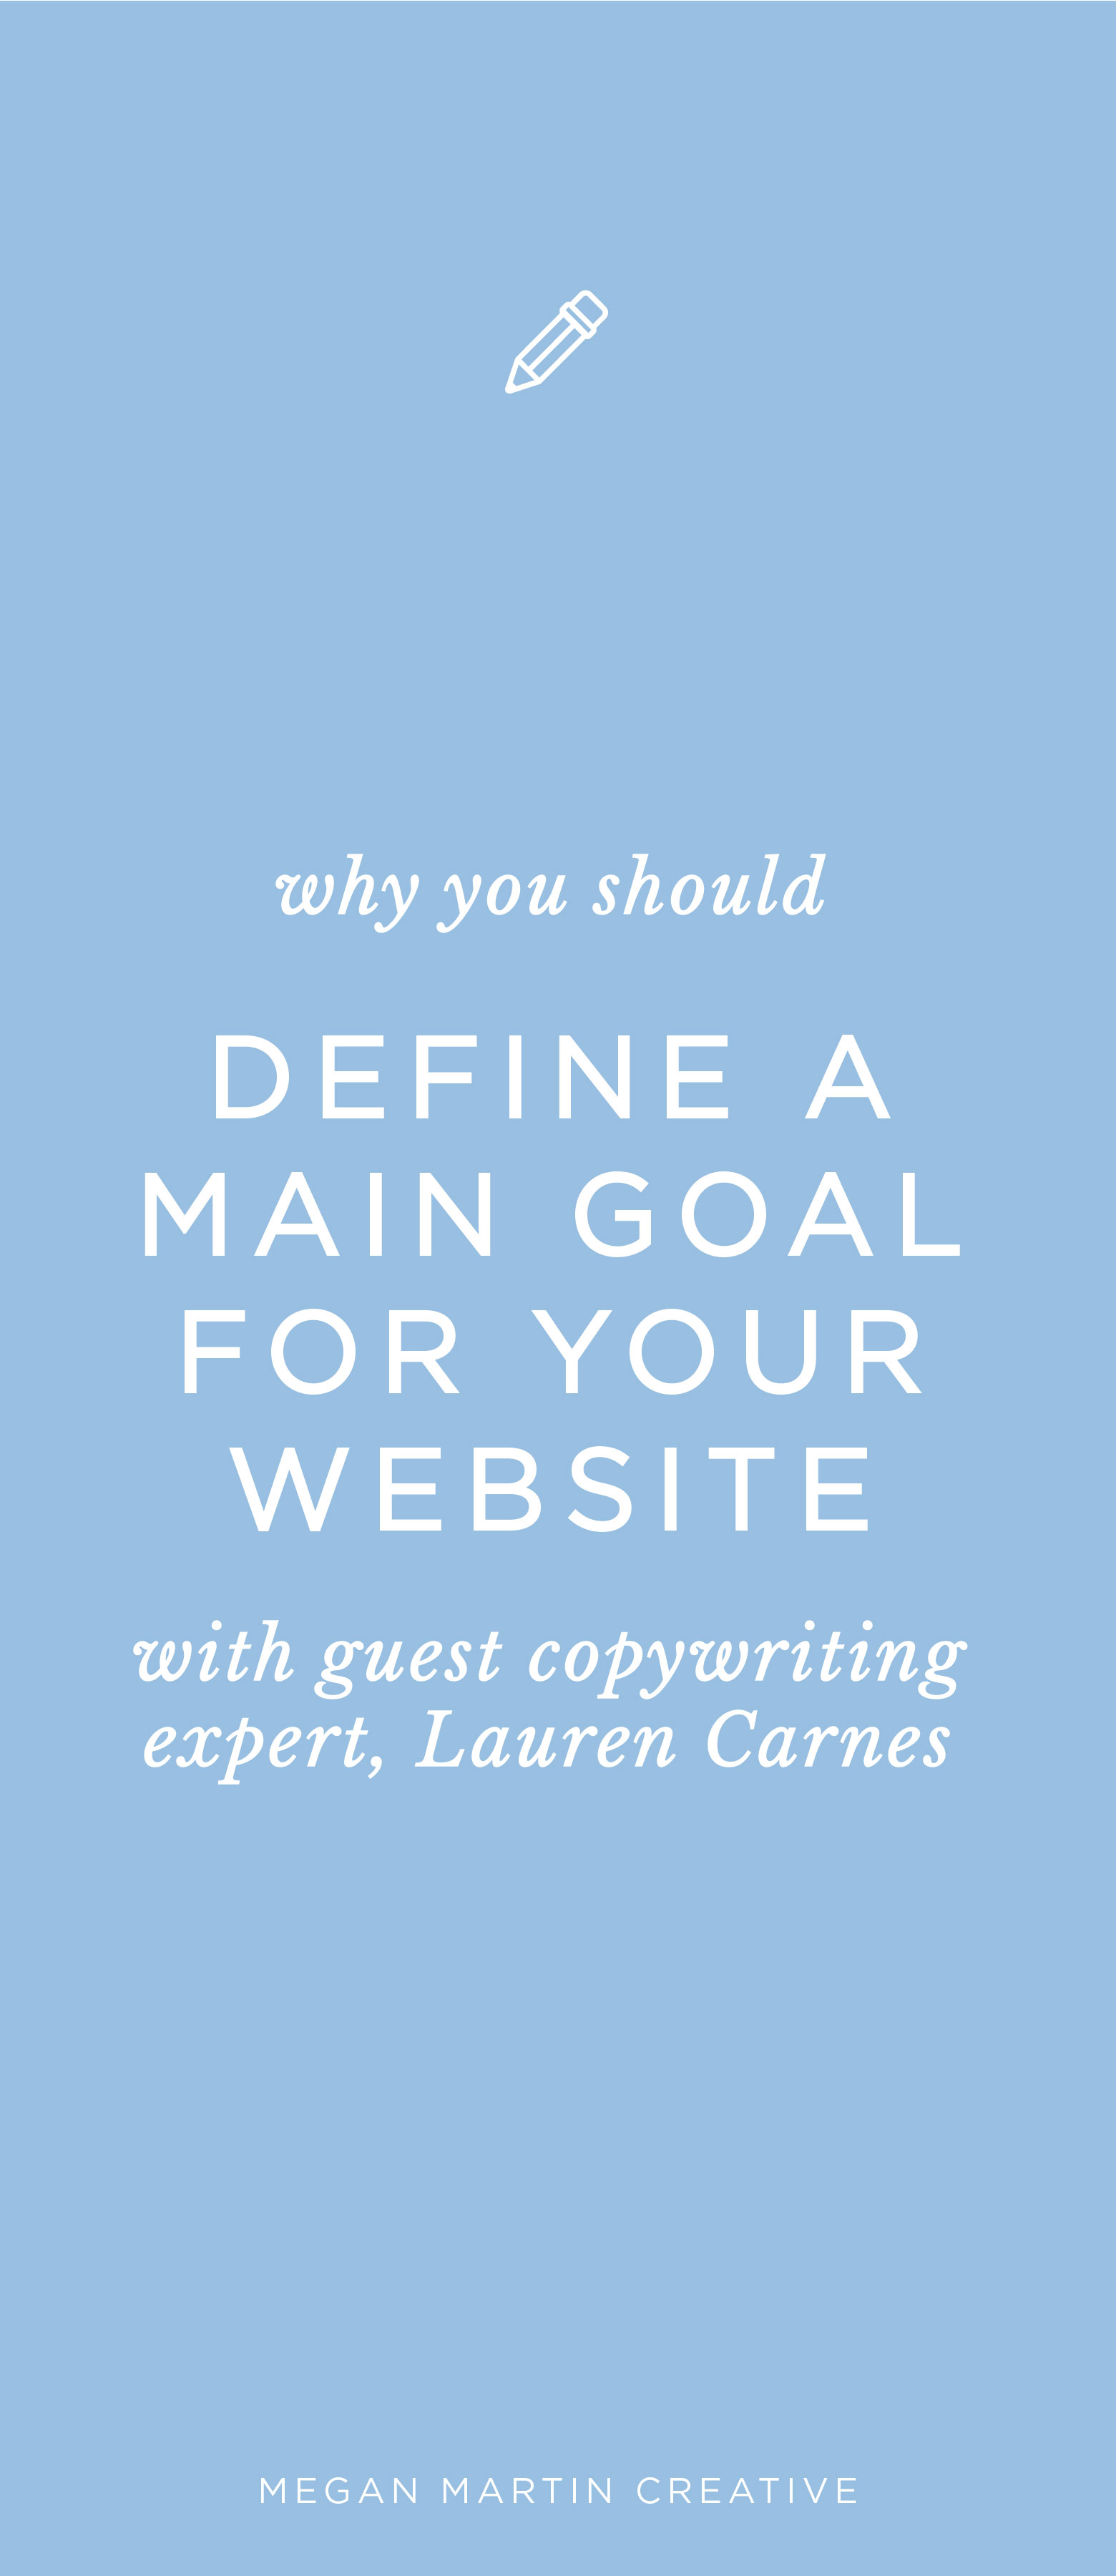 The most important part of the website design process with guest copywriting expert Lauren Carnes on Megan Martin Creative, website copywriting tips, brand, branding, marketing strategy